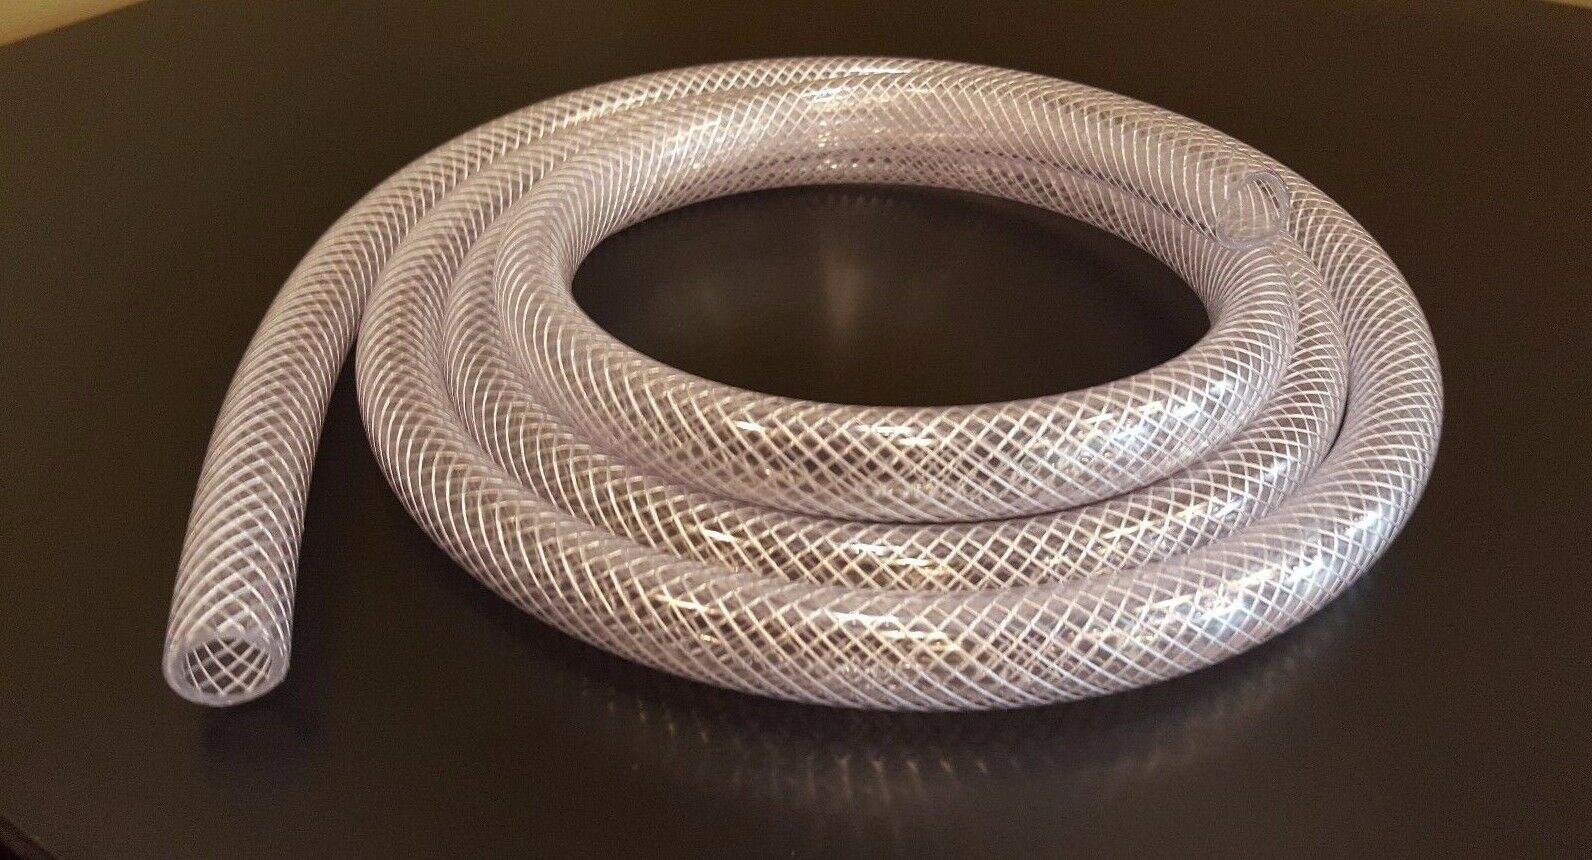 Any Size Clear Pvc Reinforced Flexible Braided Vinyl Tube/hose 3/16" - 2" Inch